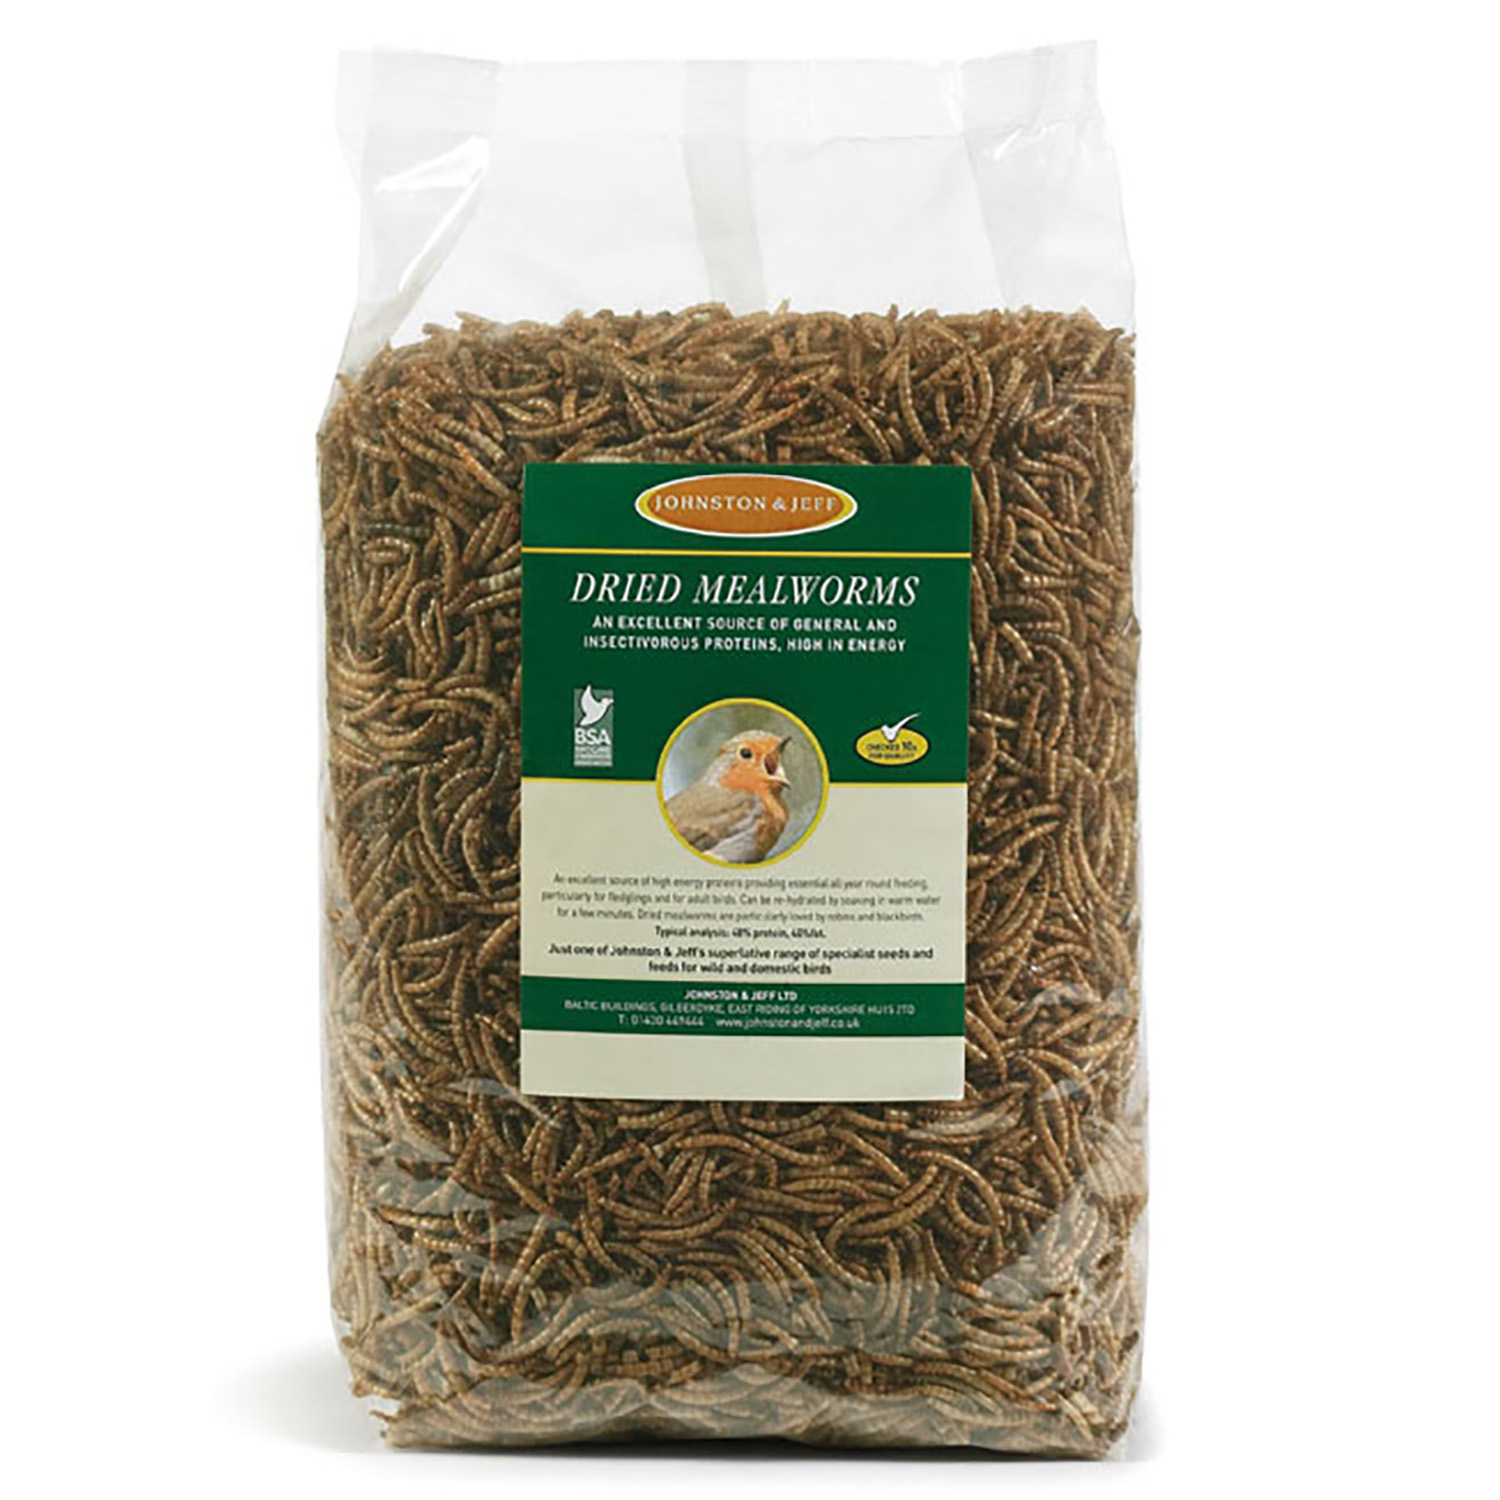 Johnston & Jeff Dried Mealworms Bird Feed 500g Image